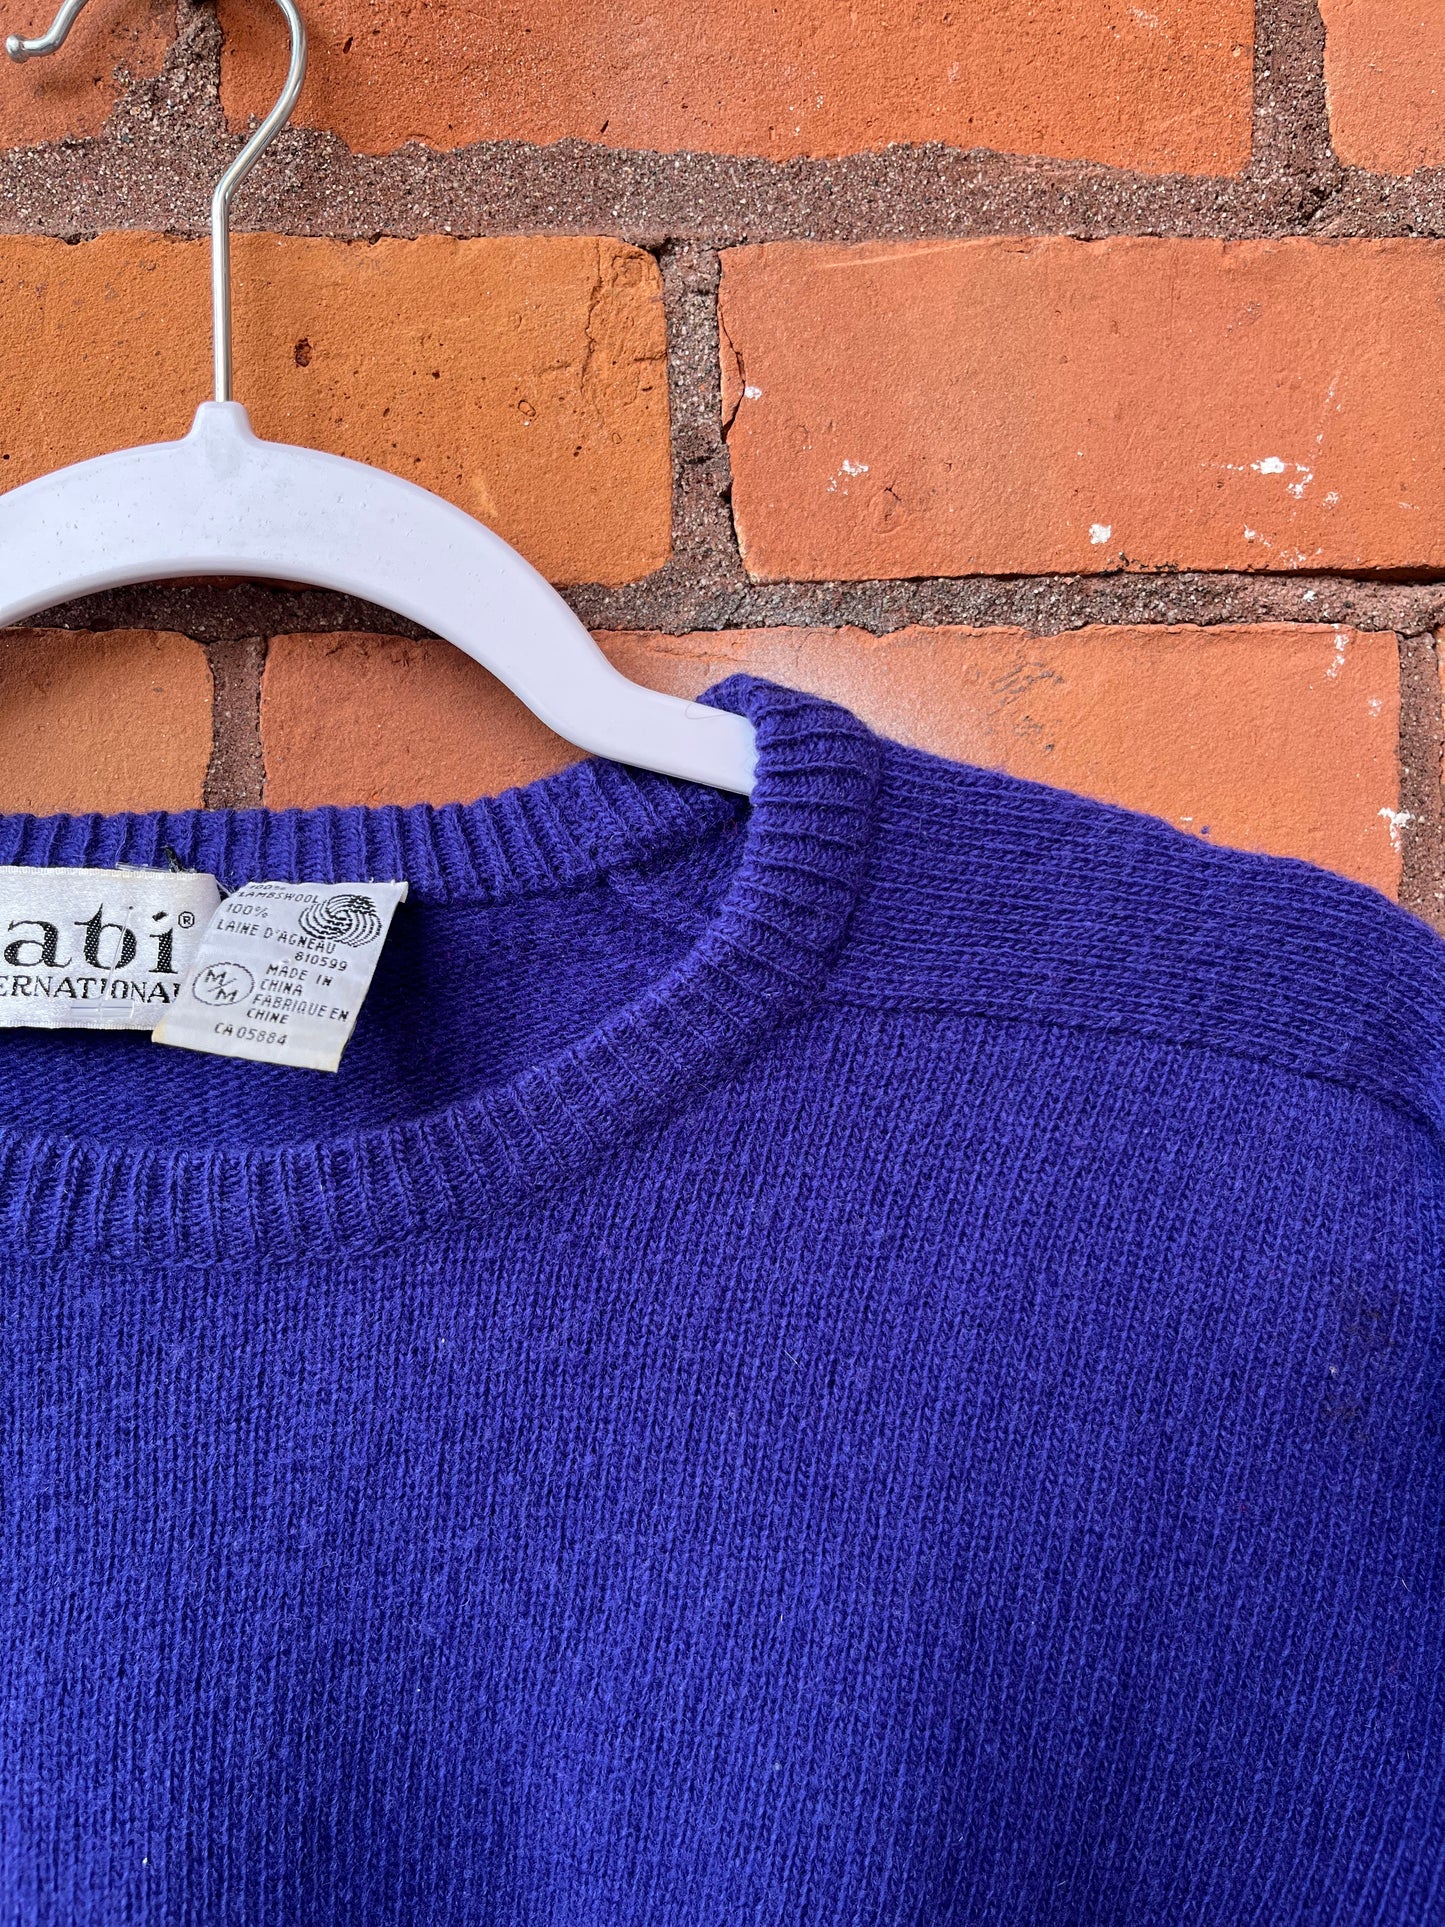 90’s Vintage Blue Lambswool Sweater / Size M